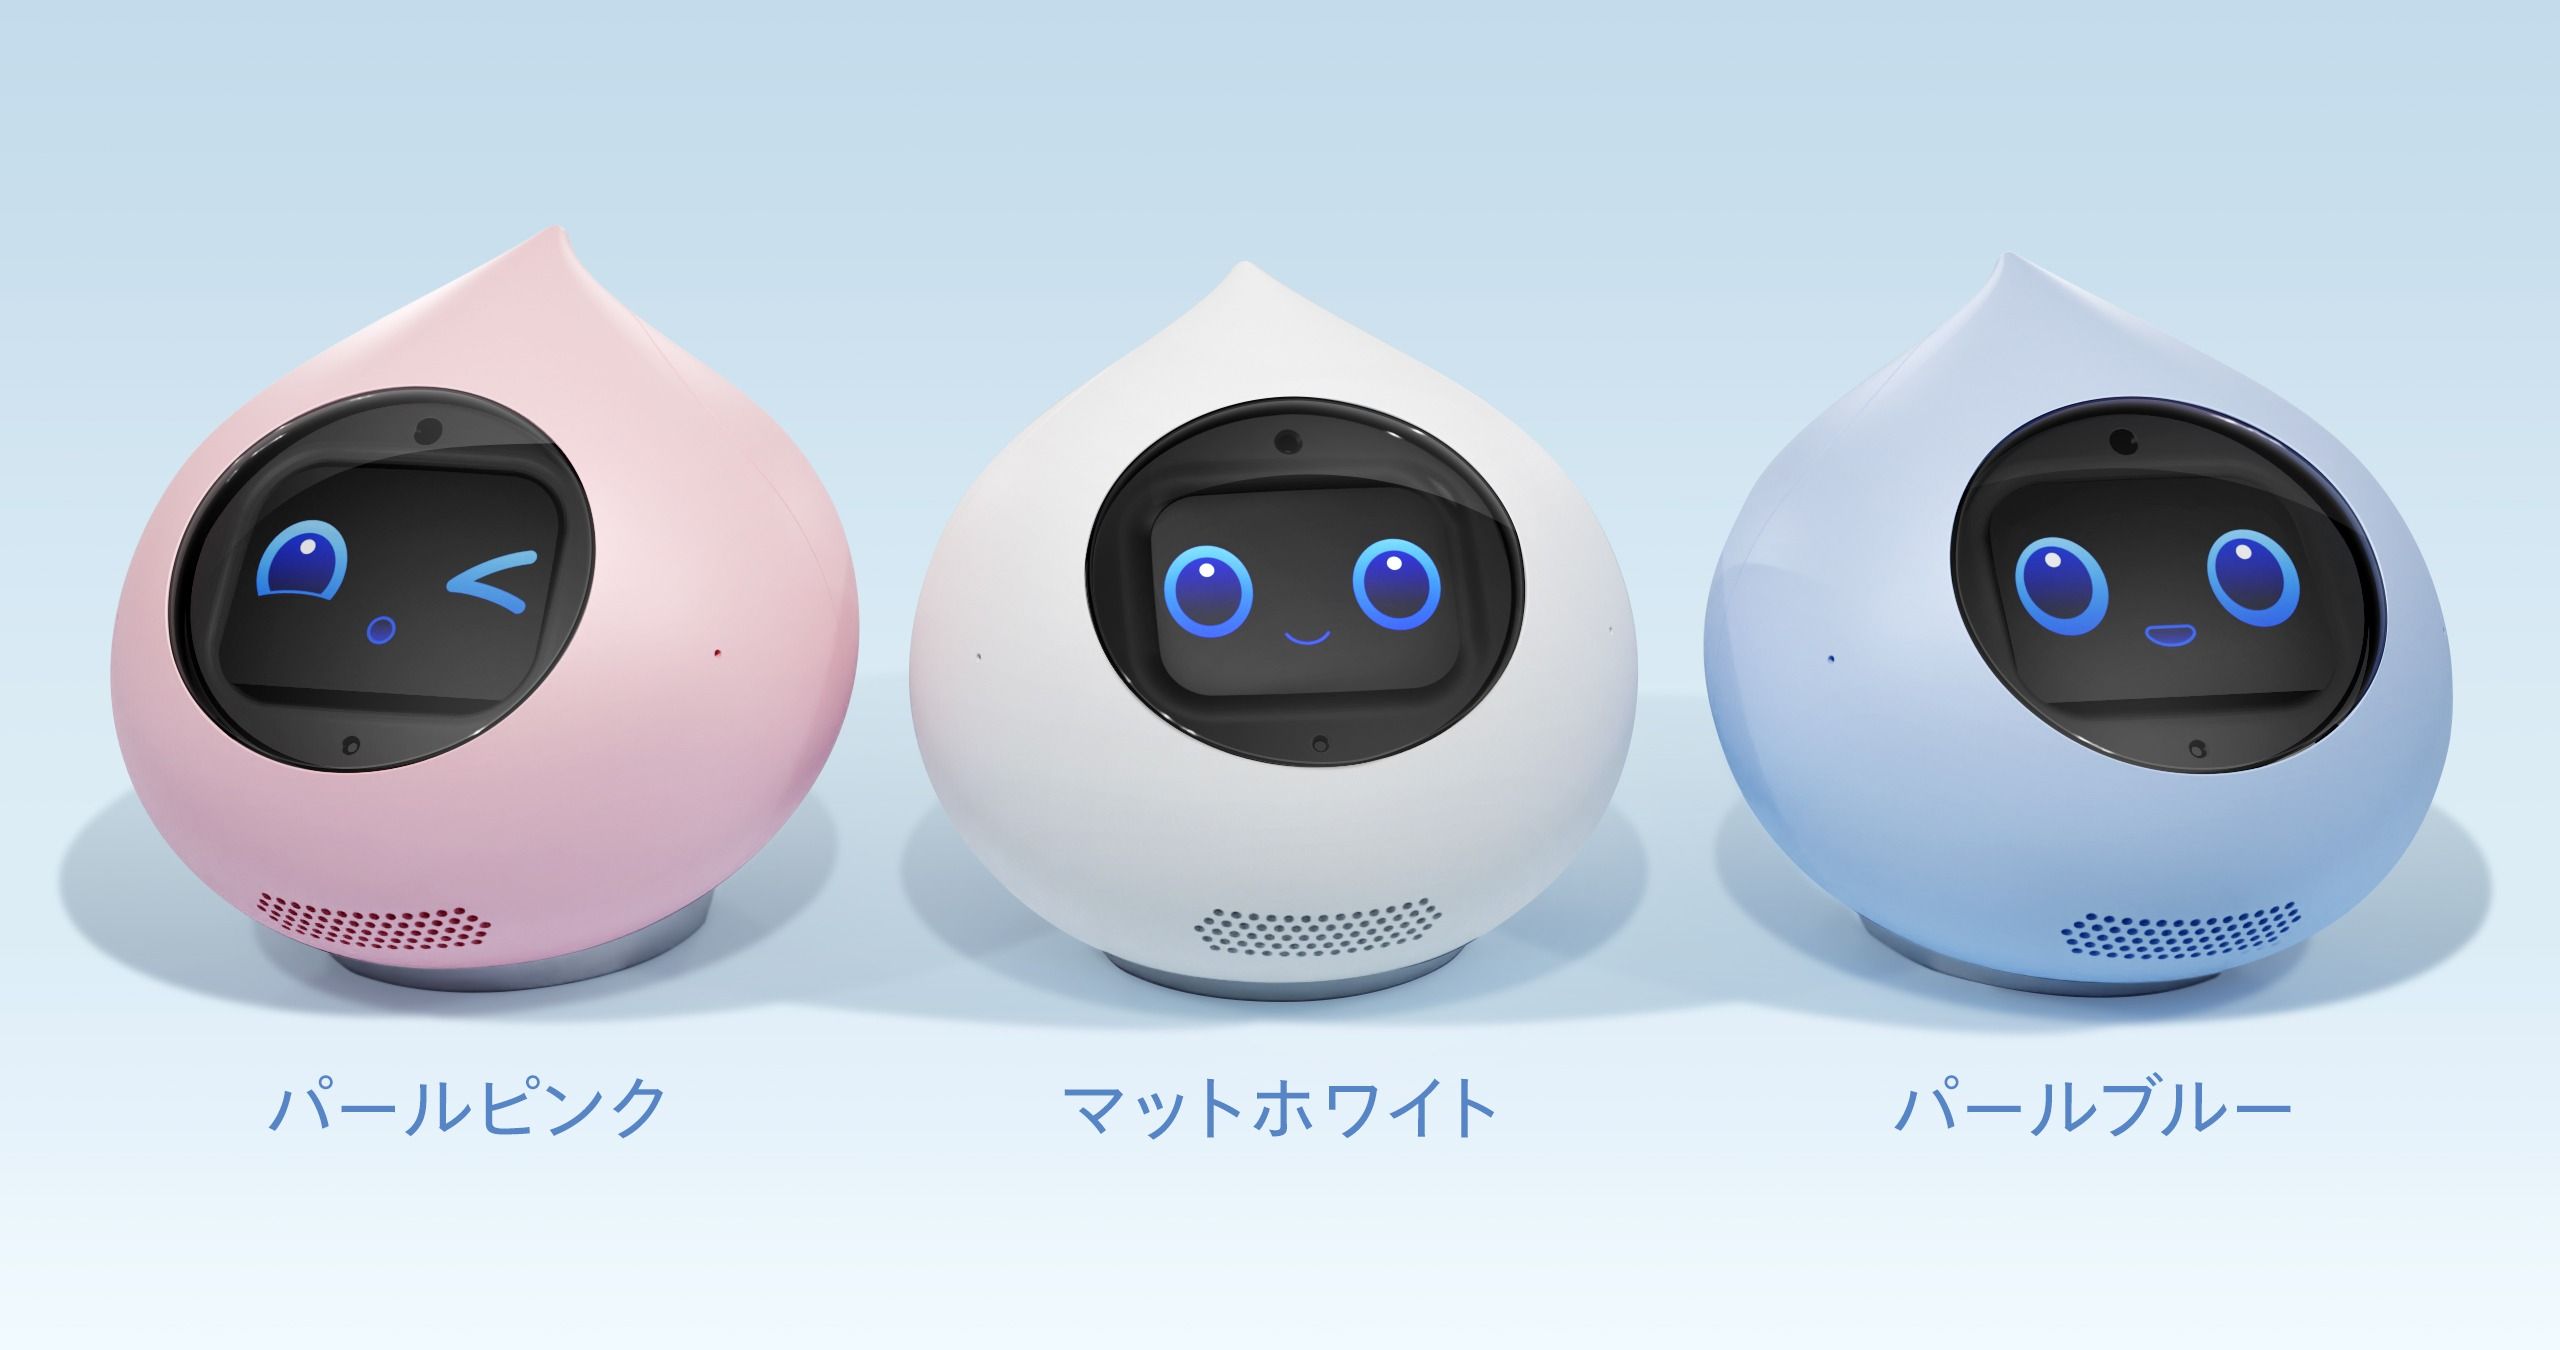 romi パールピンク AIおしゃべりロボット - その他